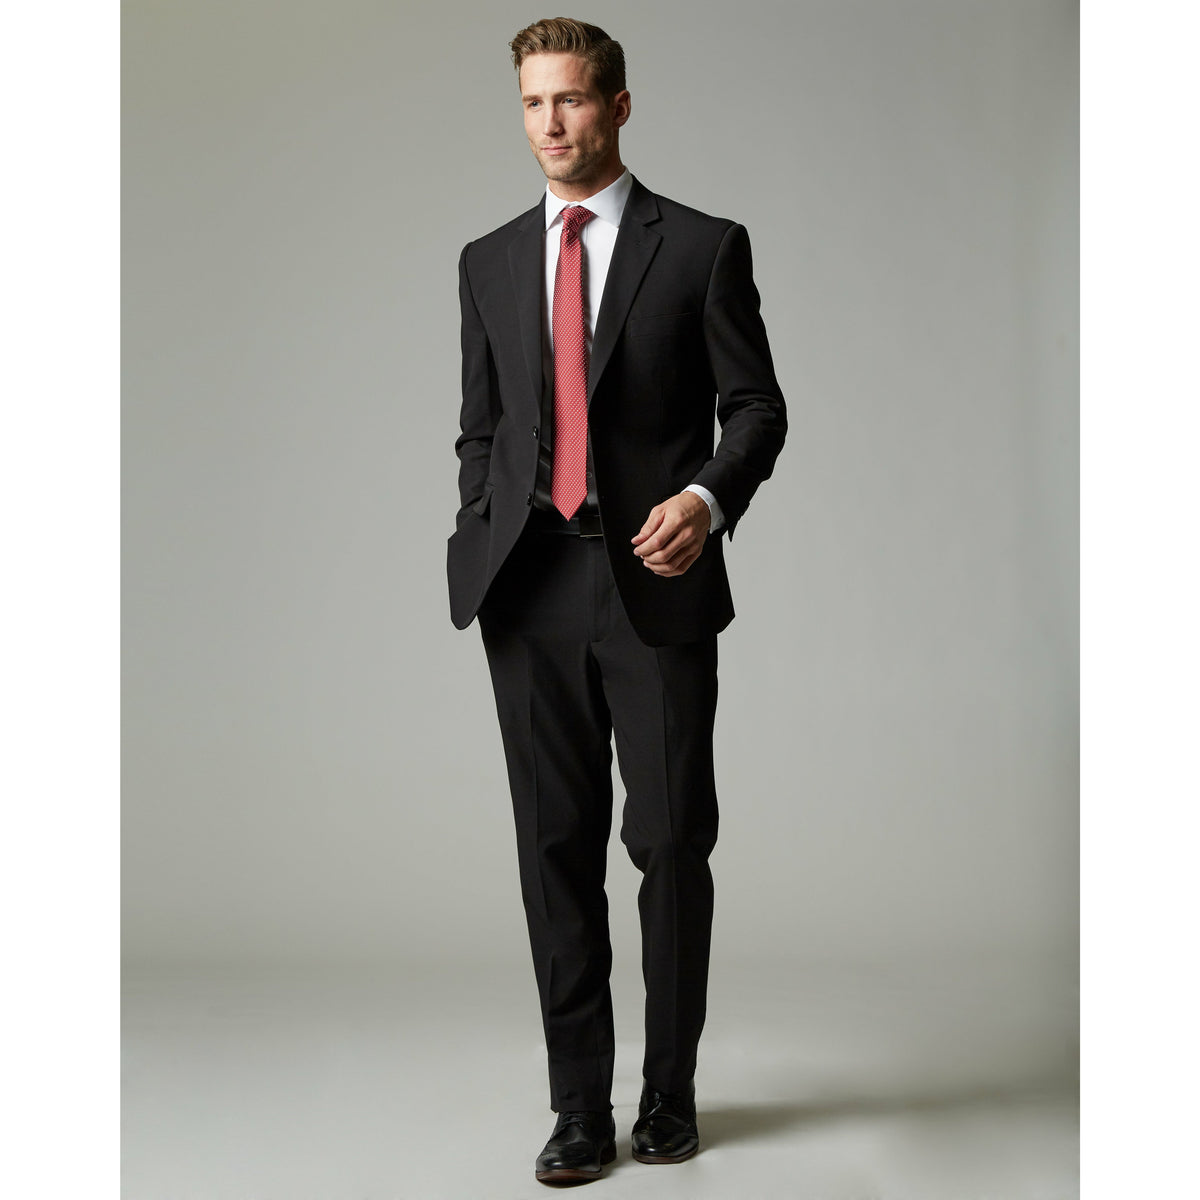 Tempo Stretch Slim Fit Dress Pants – Petersen's Clothing